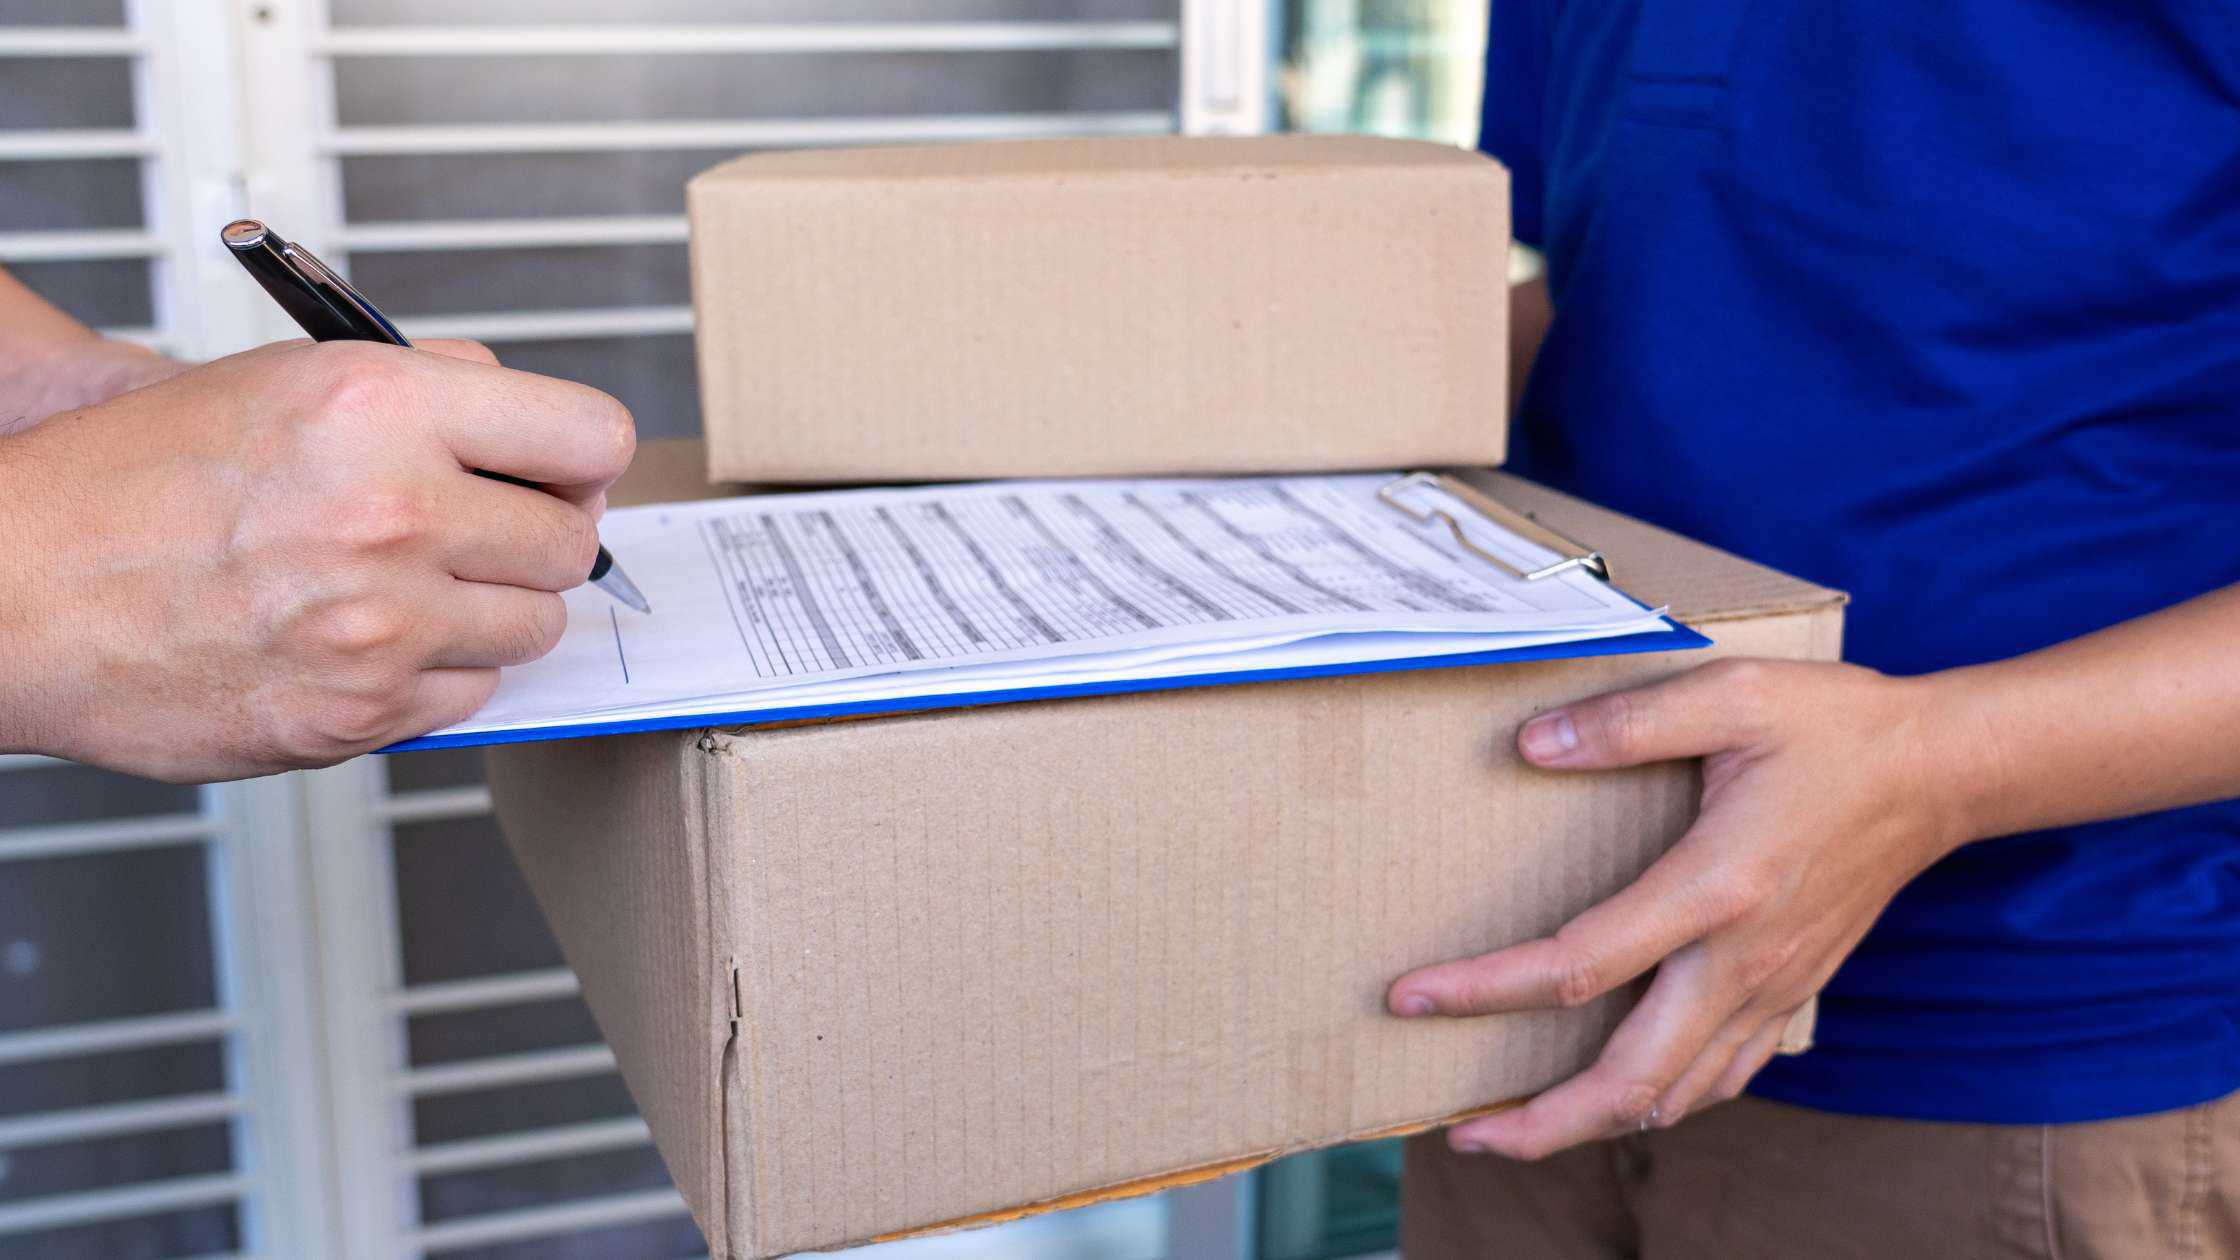 If you need your parcels delivered in a timely fashion, same day delivery should be considered. Find out what items can be delivered with this courier service.